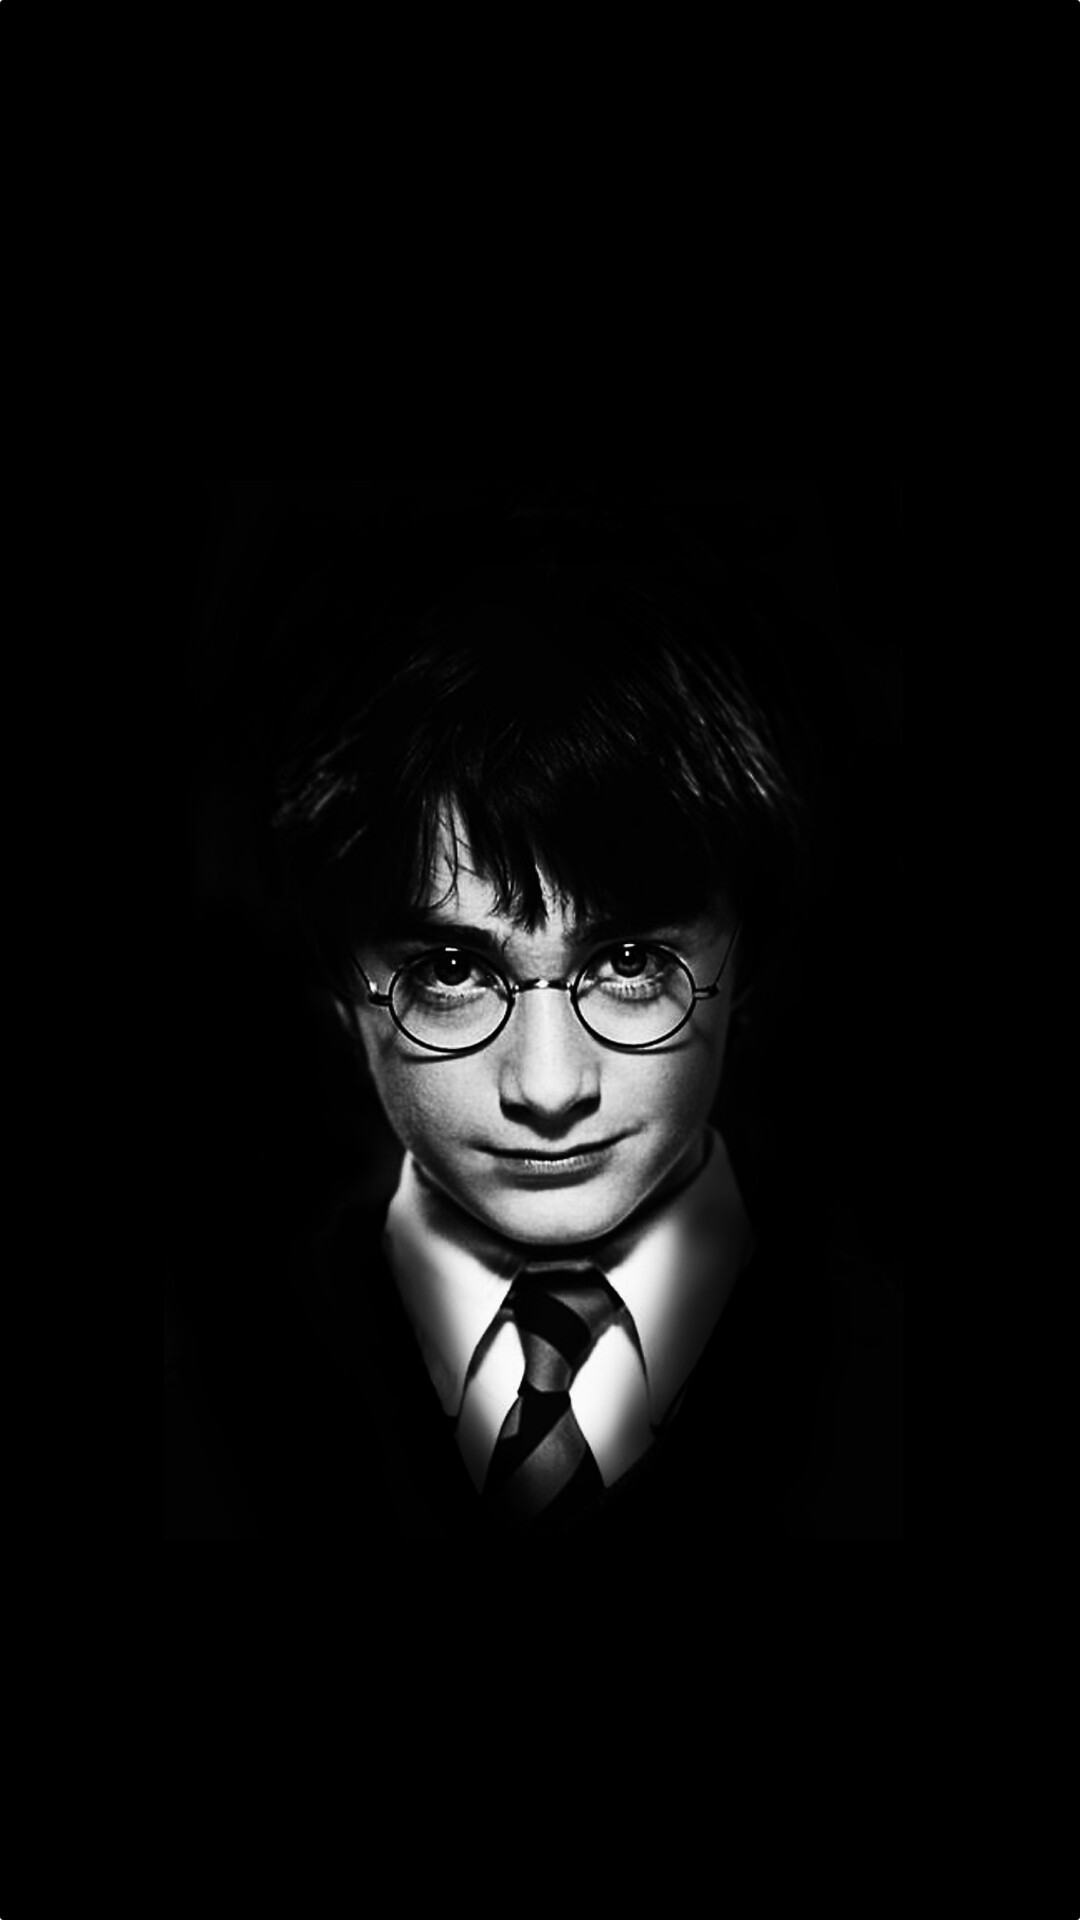 Harry Potter: Daniel Jacob Radcliffe, An English actor, Black and white. 1080x1920 Full HD Wallpaper.